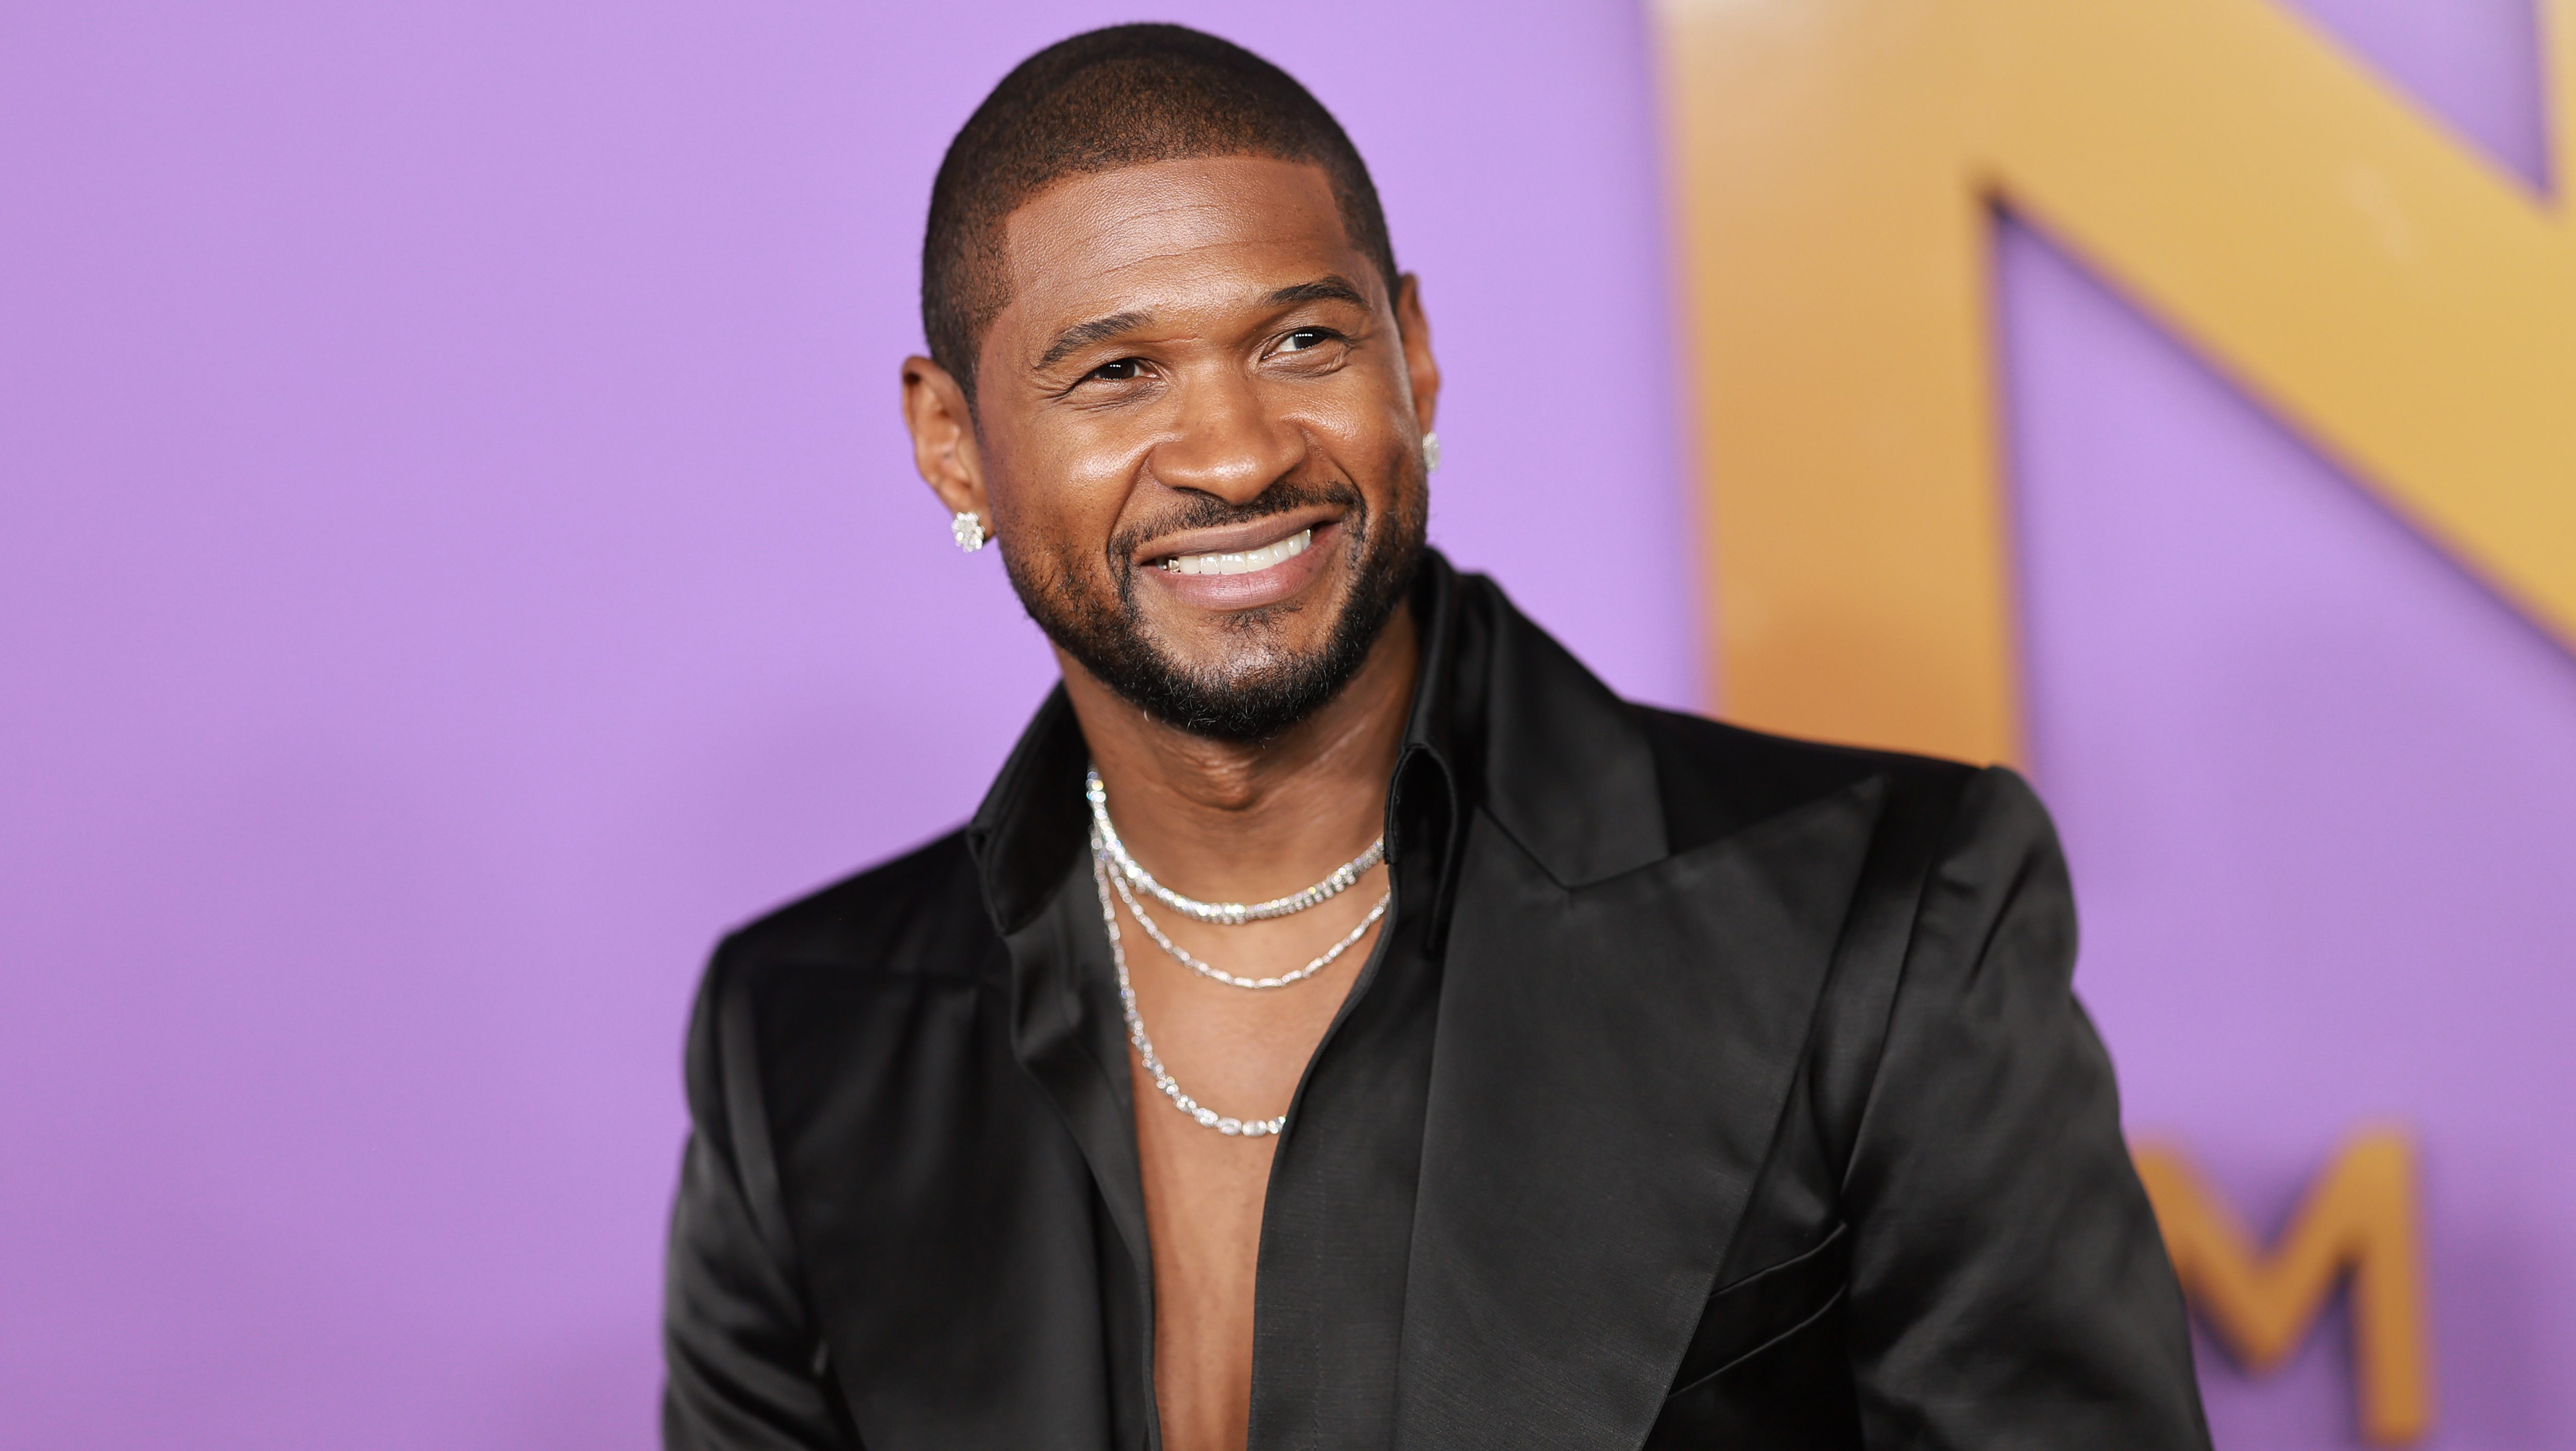 Usher says his son ‘stole’ his phone to DM his favorite artist